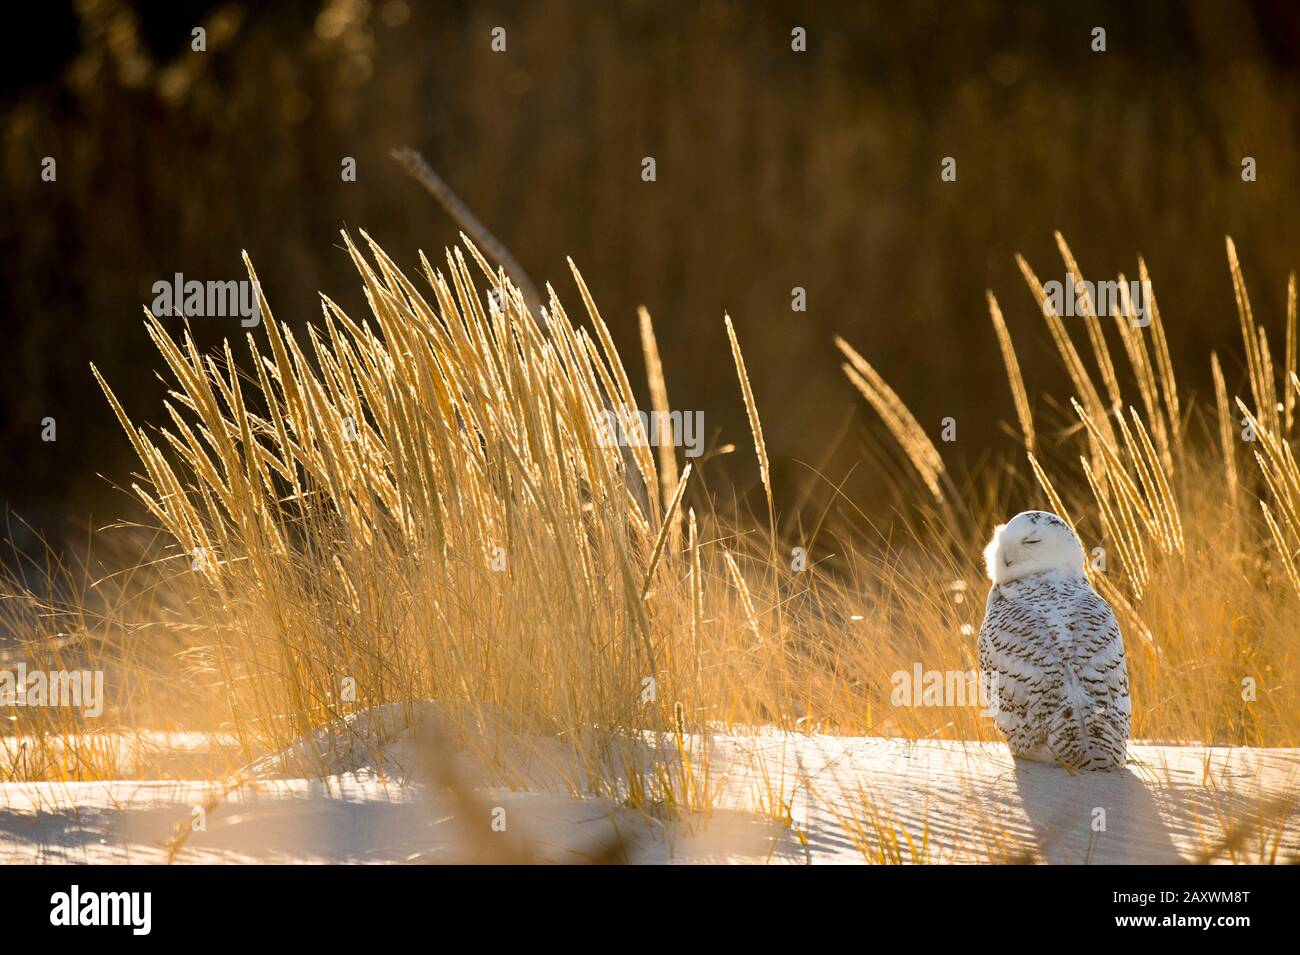 A Snowy Owl perched on a sand dune with golden glowing dune grasses around it in the bright winter sunlight. Stock Photo